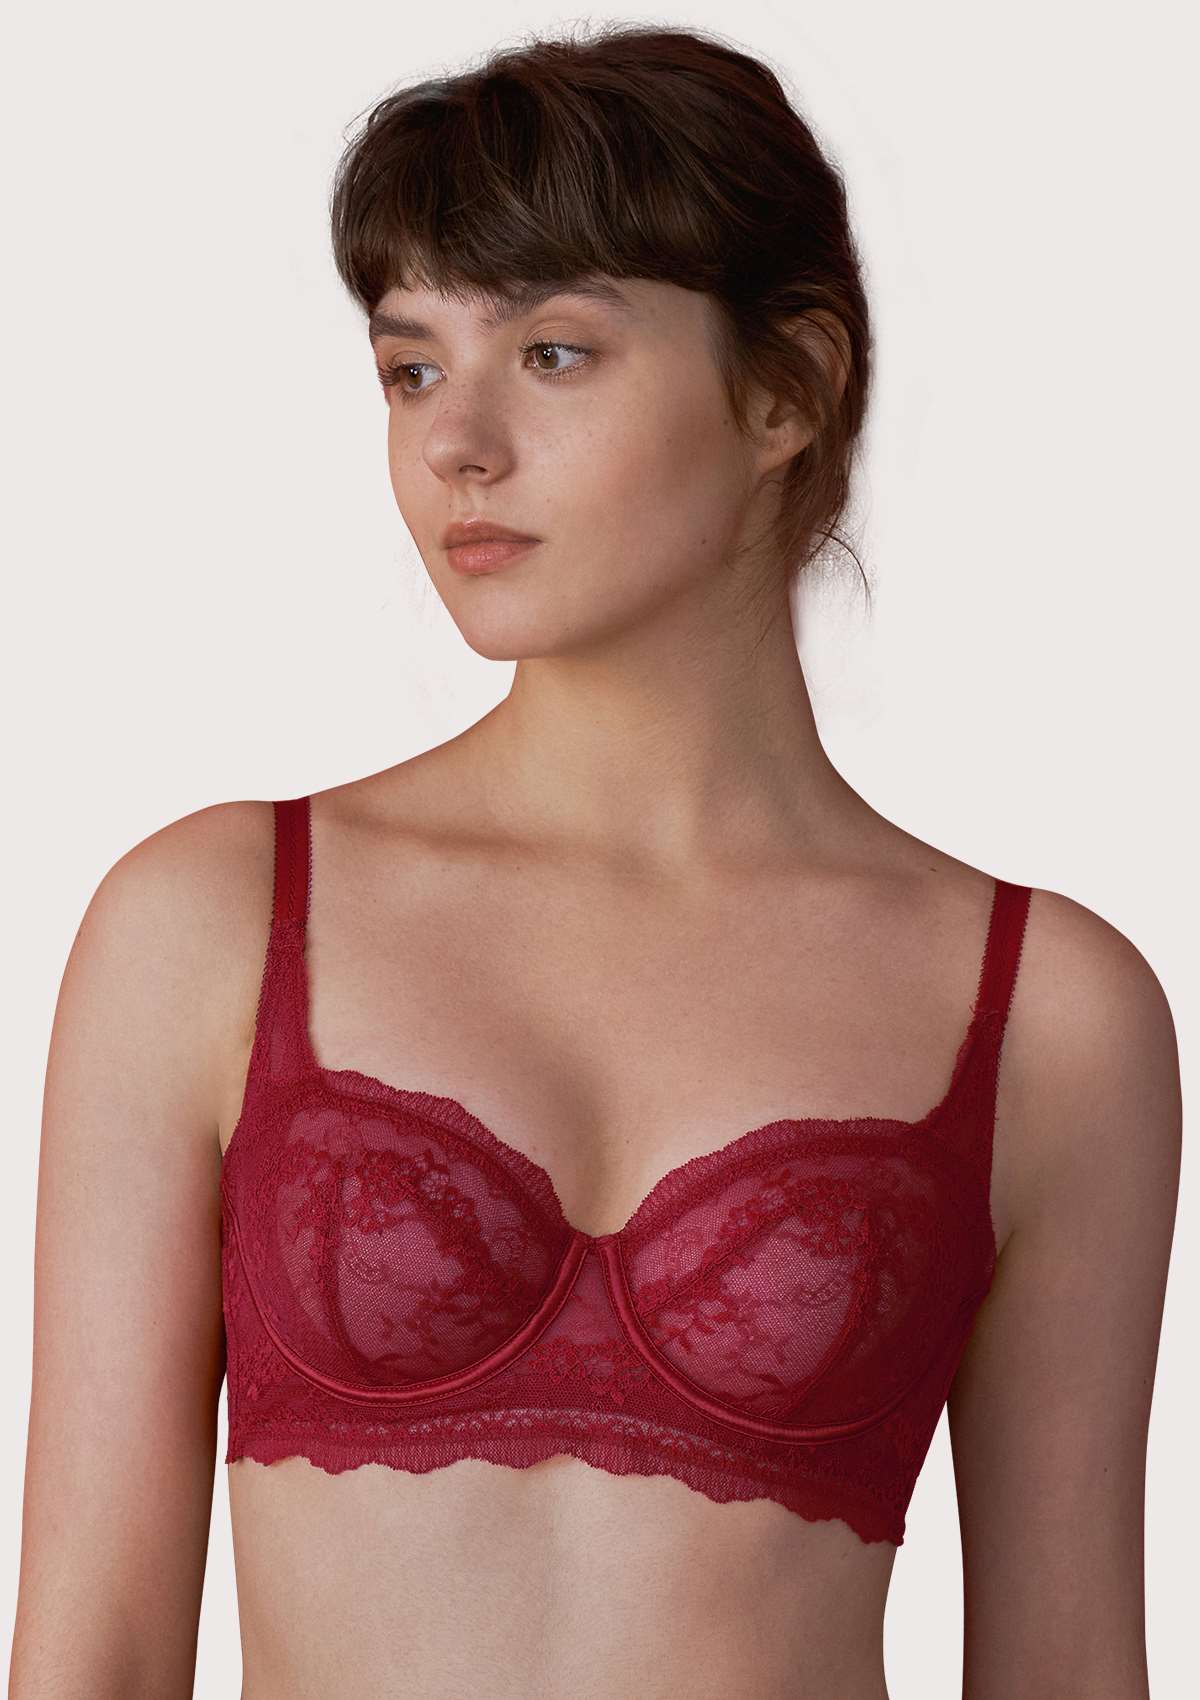 HSIA Floral Lace Unlined Bridal Balconette Bra Set - Supportive Classic - Burgundy / 36 / D